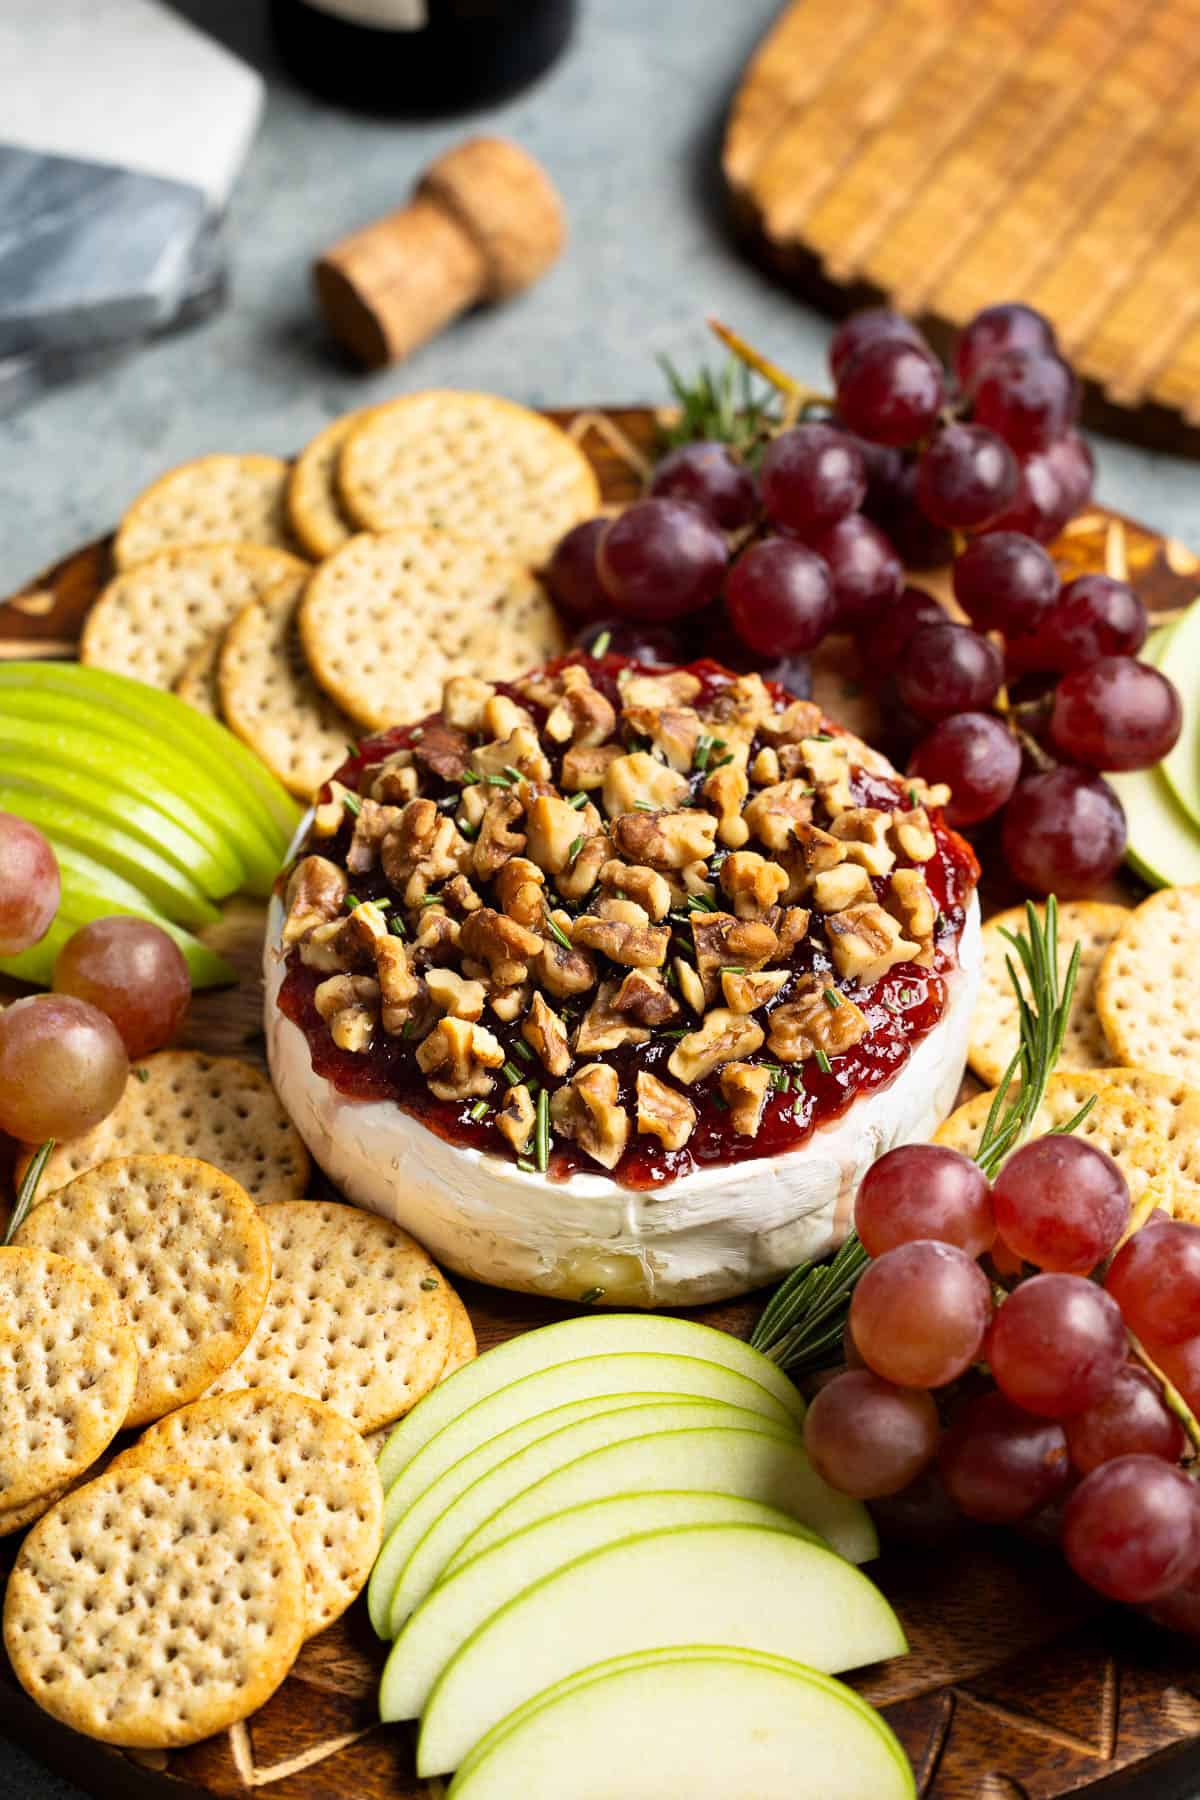 Baked brie topped with jam and walnuts served with apple slices, grapes, and crackers.